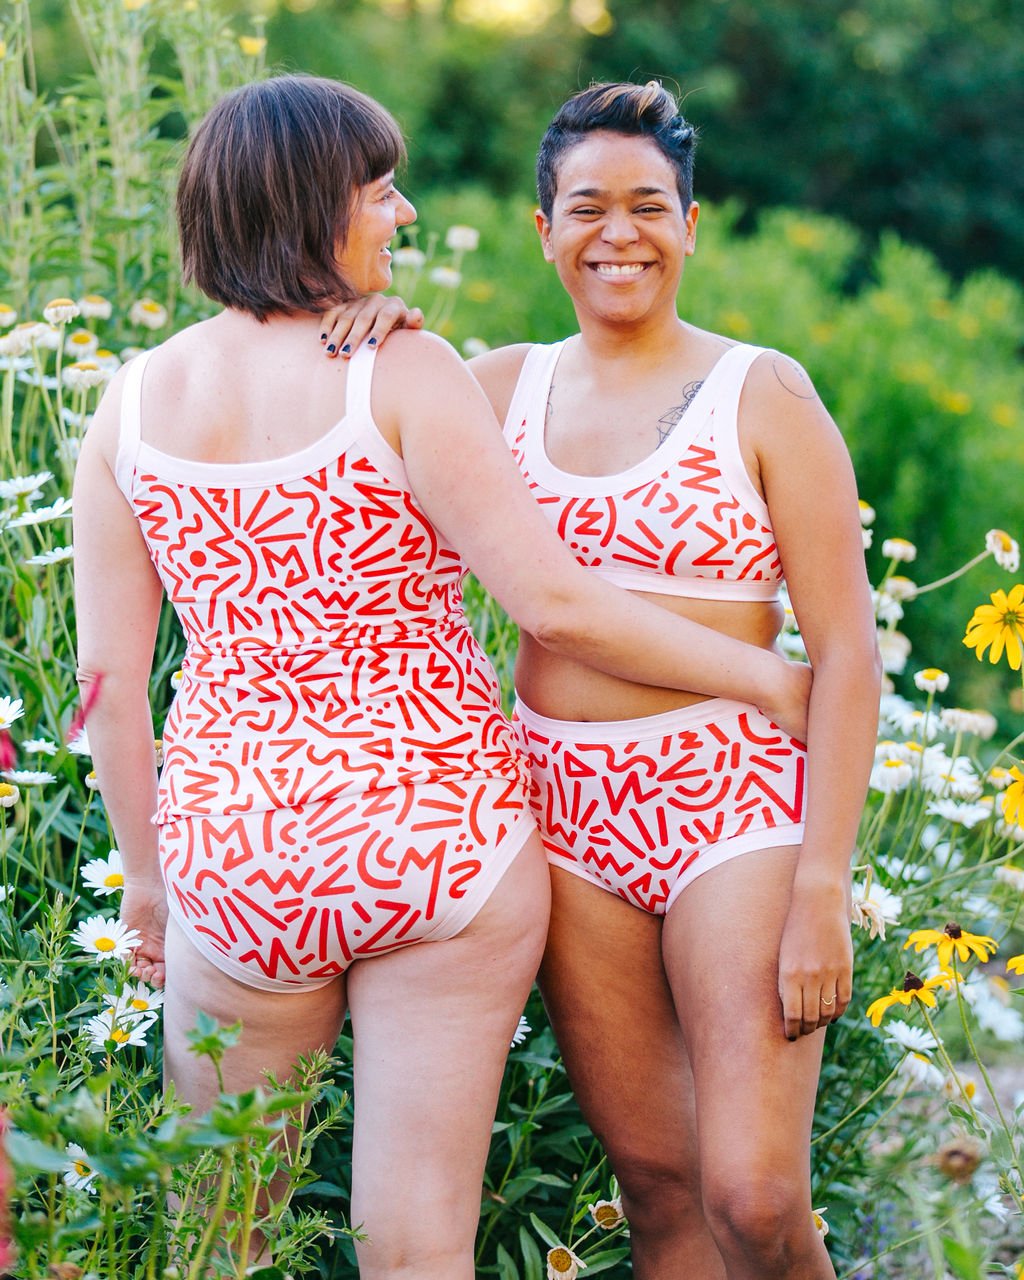 Two models smiling together wearing Thunderpants organic cotton Original style and Hipster style underwear, Camisole and Bralette in our Energy Vibes print: pink with large red squiggles.